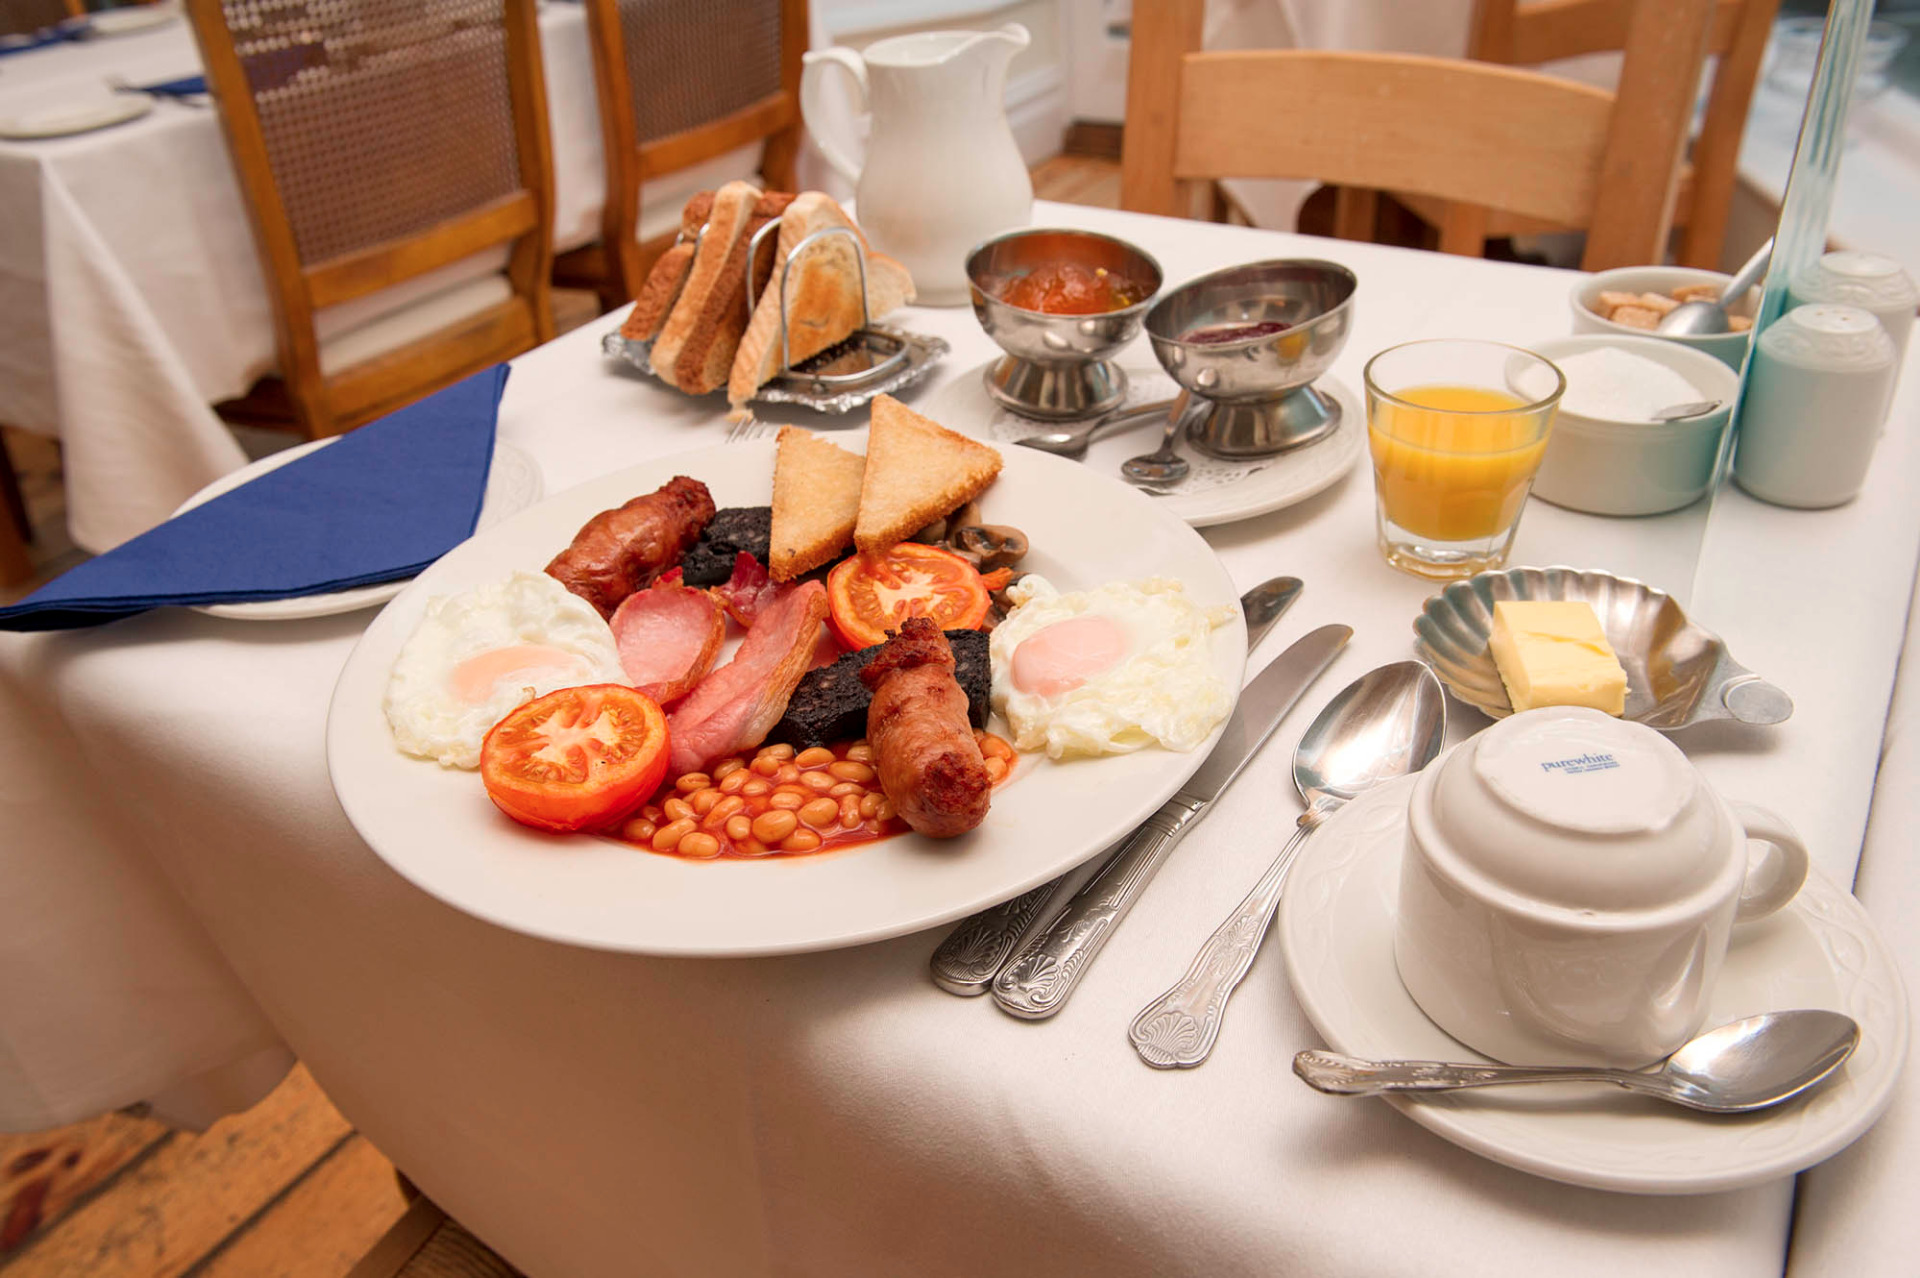 Hearty Yorkshire breakfast is included in the room rate